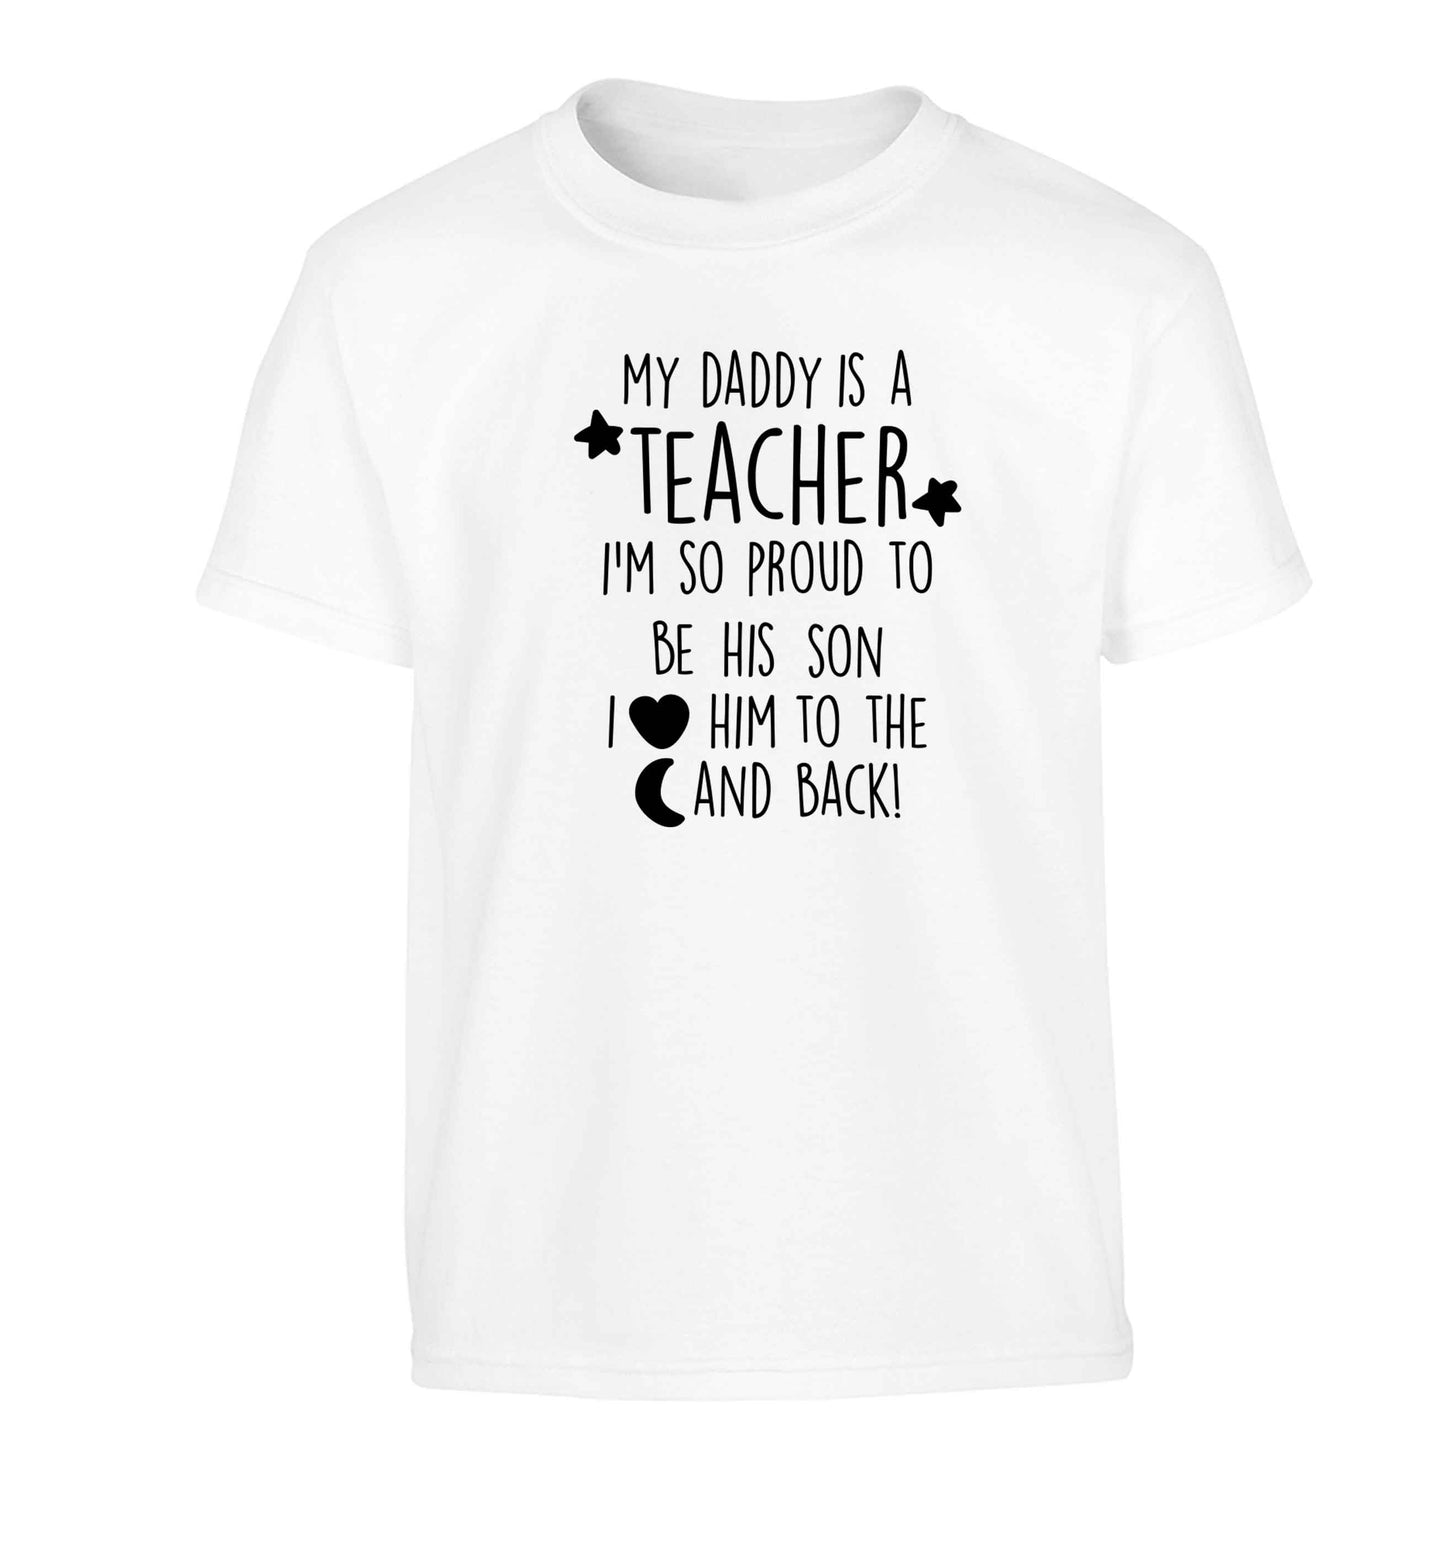 My daddy is a teacher I'm so proud to be his son I love her to the moon and back Children's white Tshirt 12-13 Years